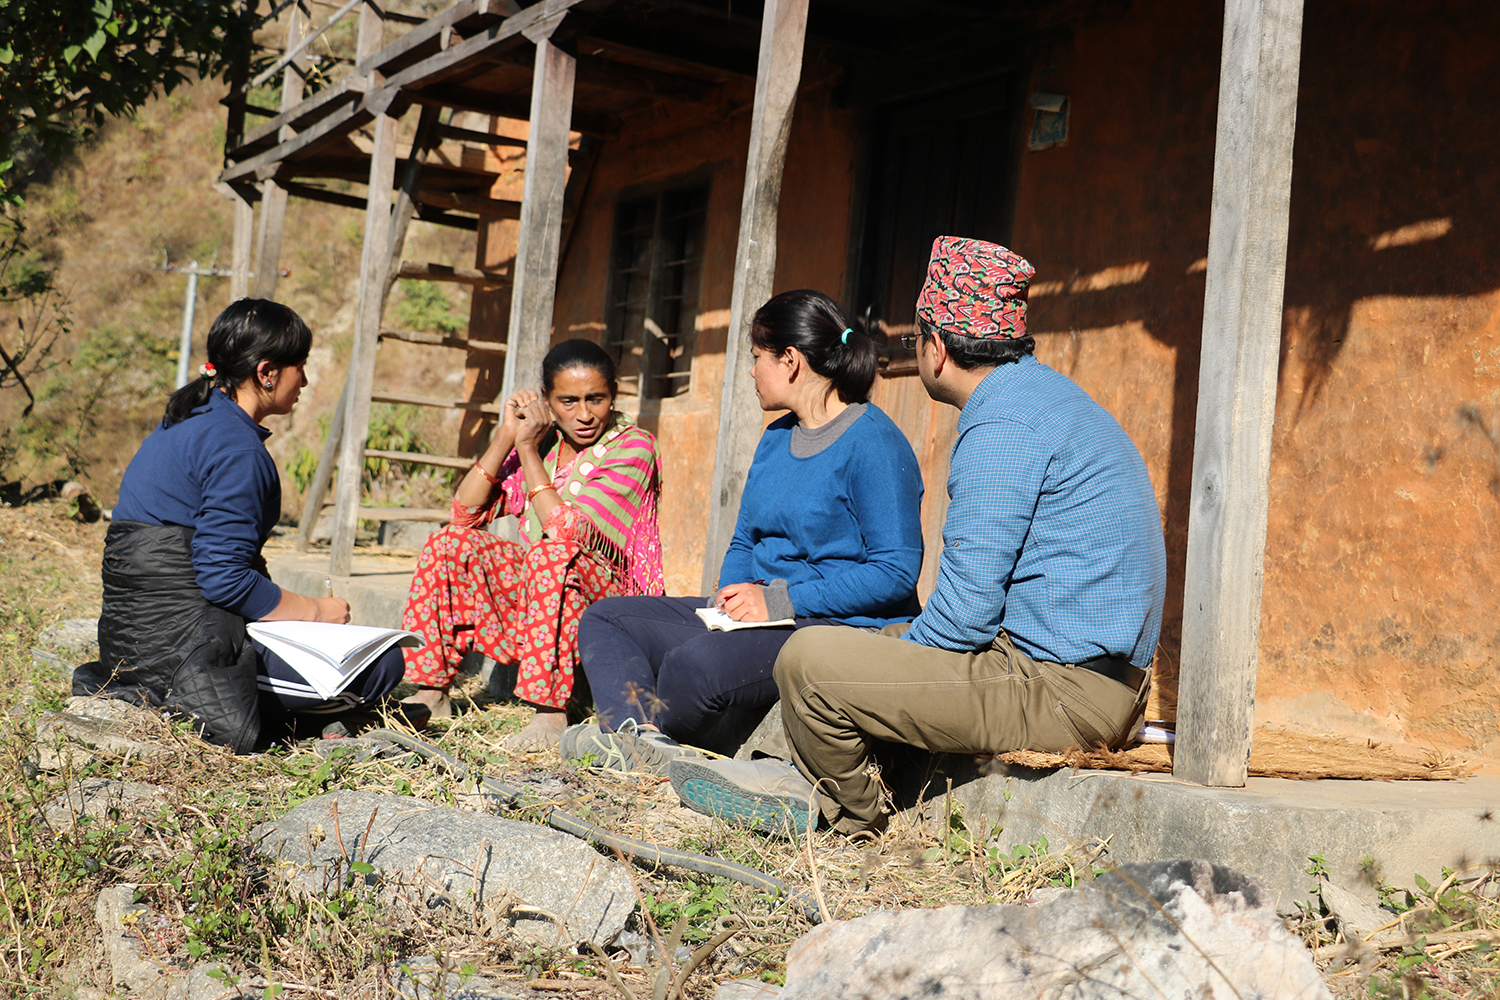 A group of people in Nepal sat down having a discussion